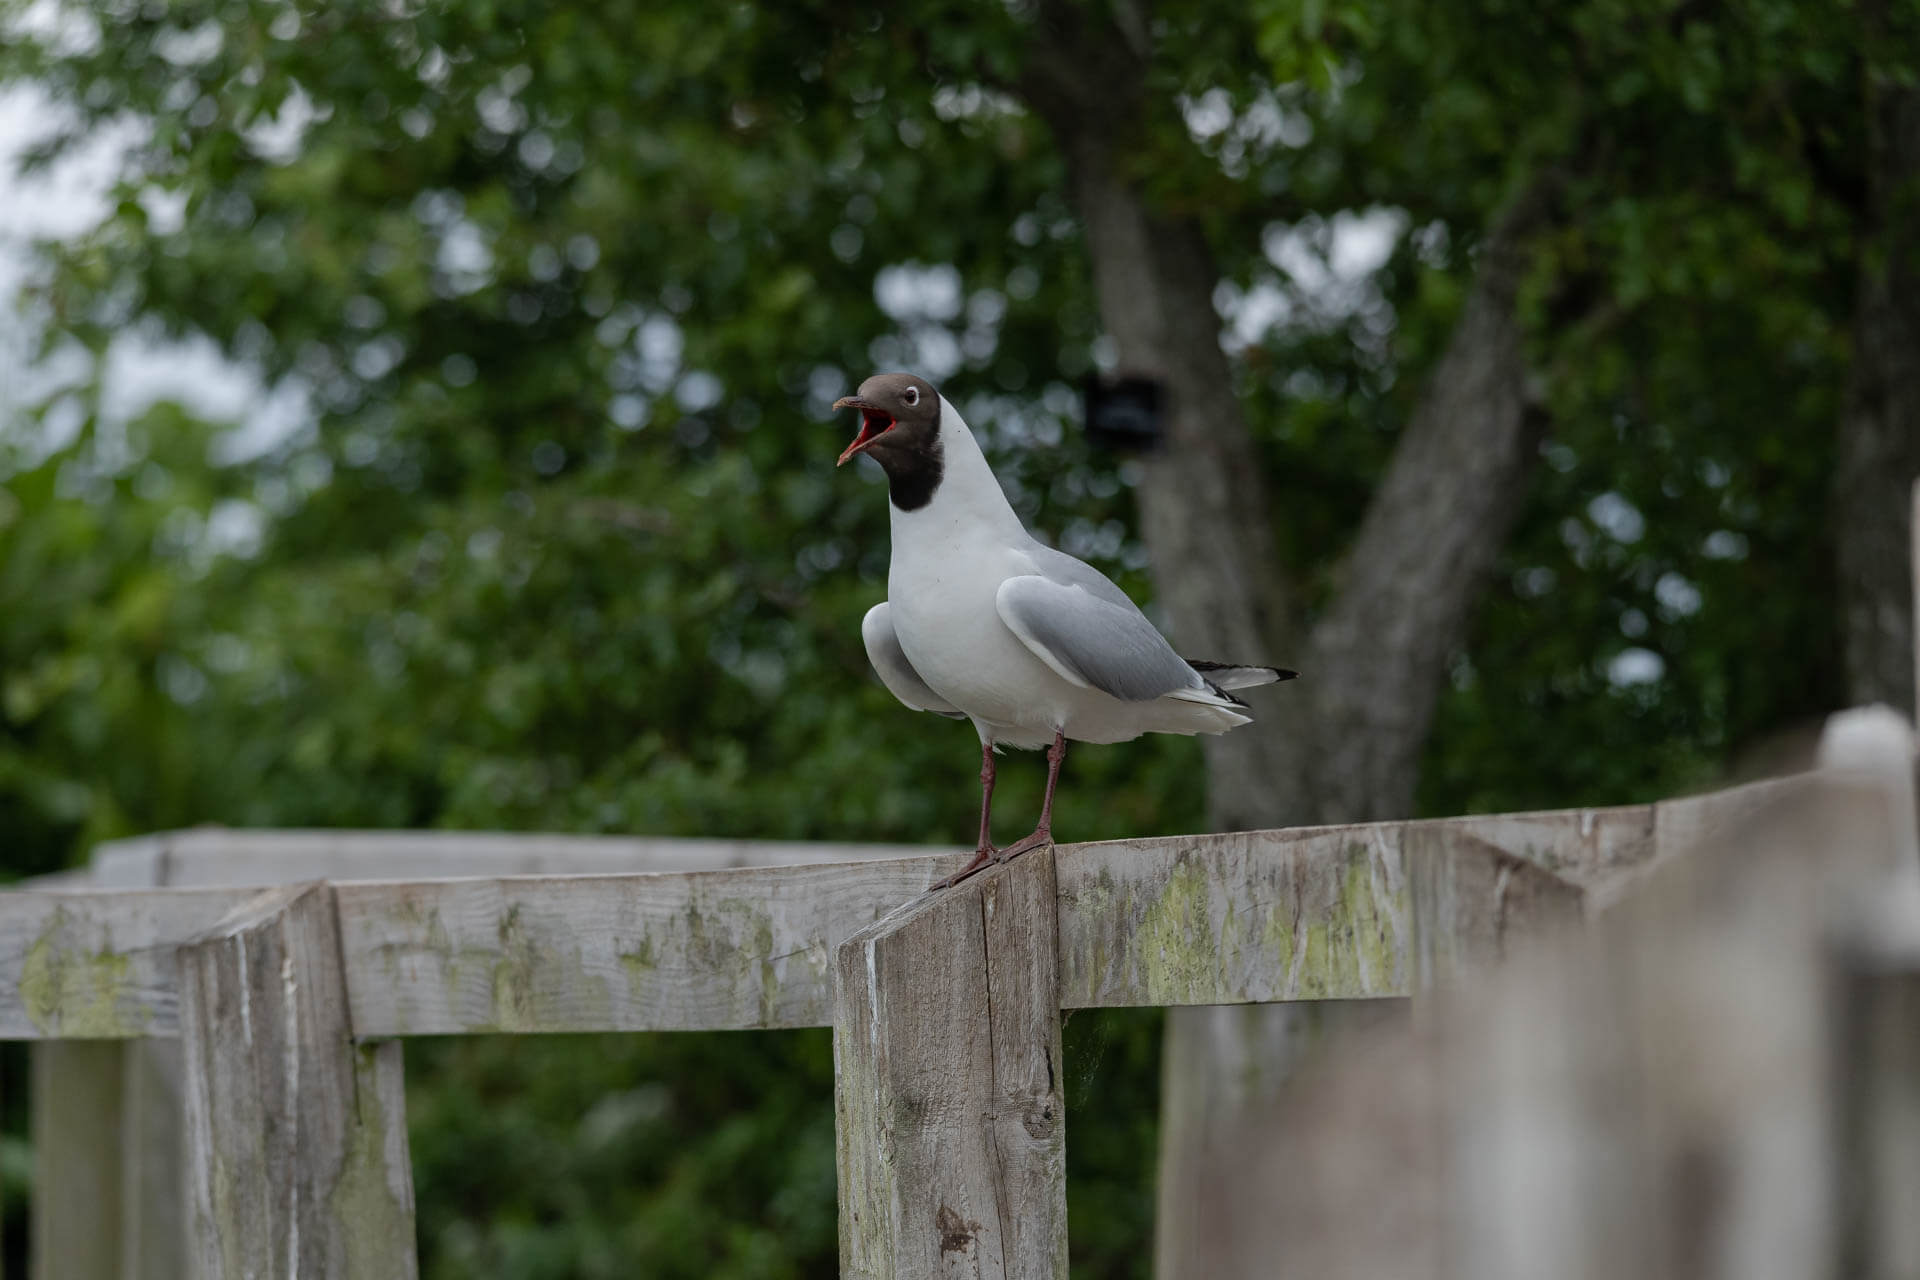 The Black-Headed Gull on the fence post